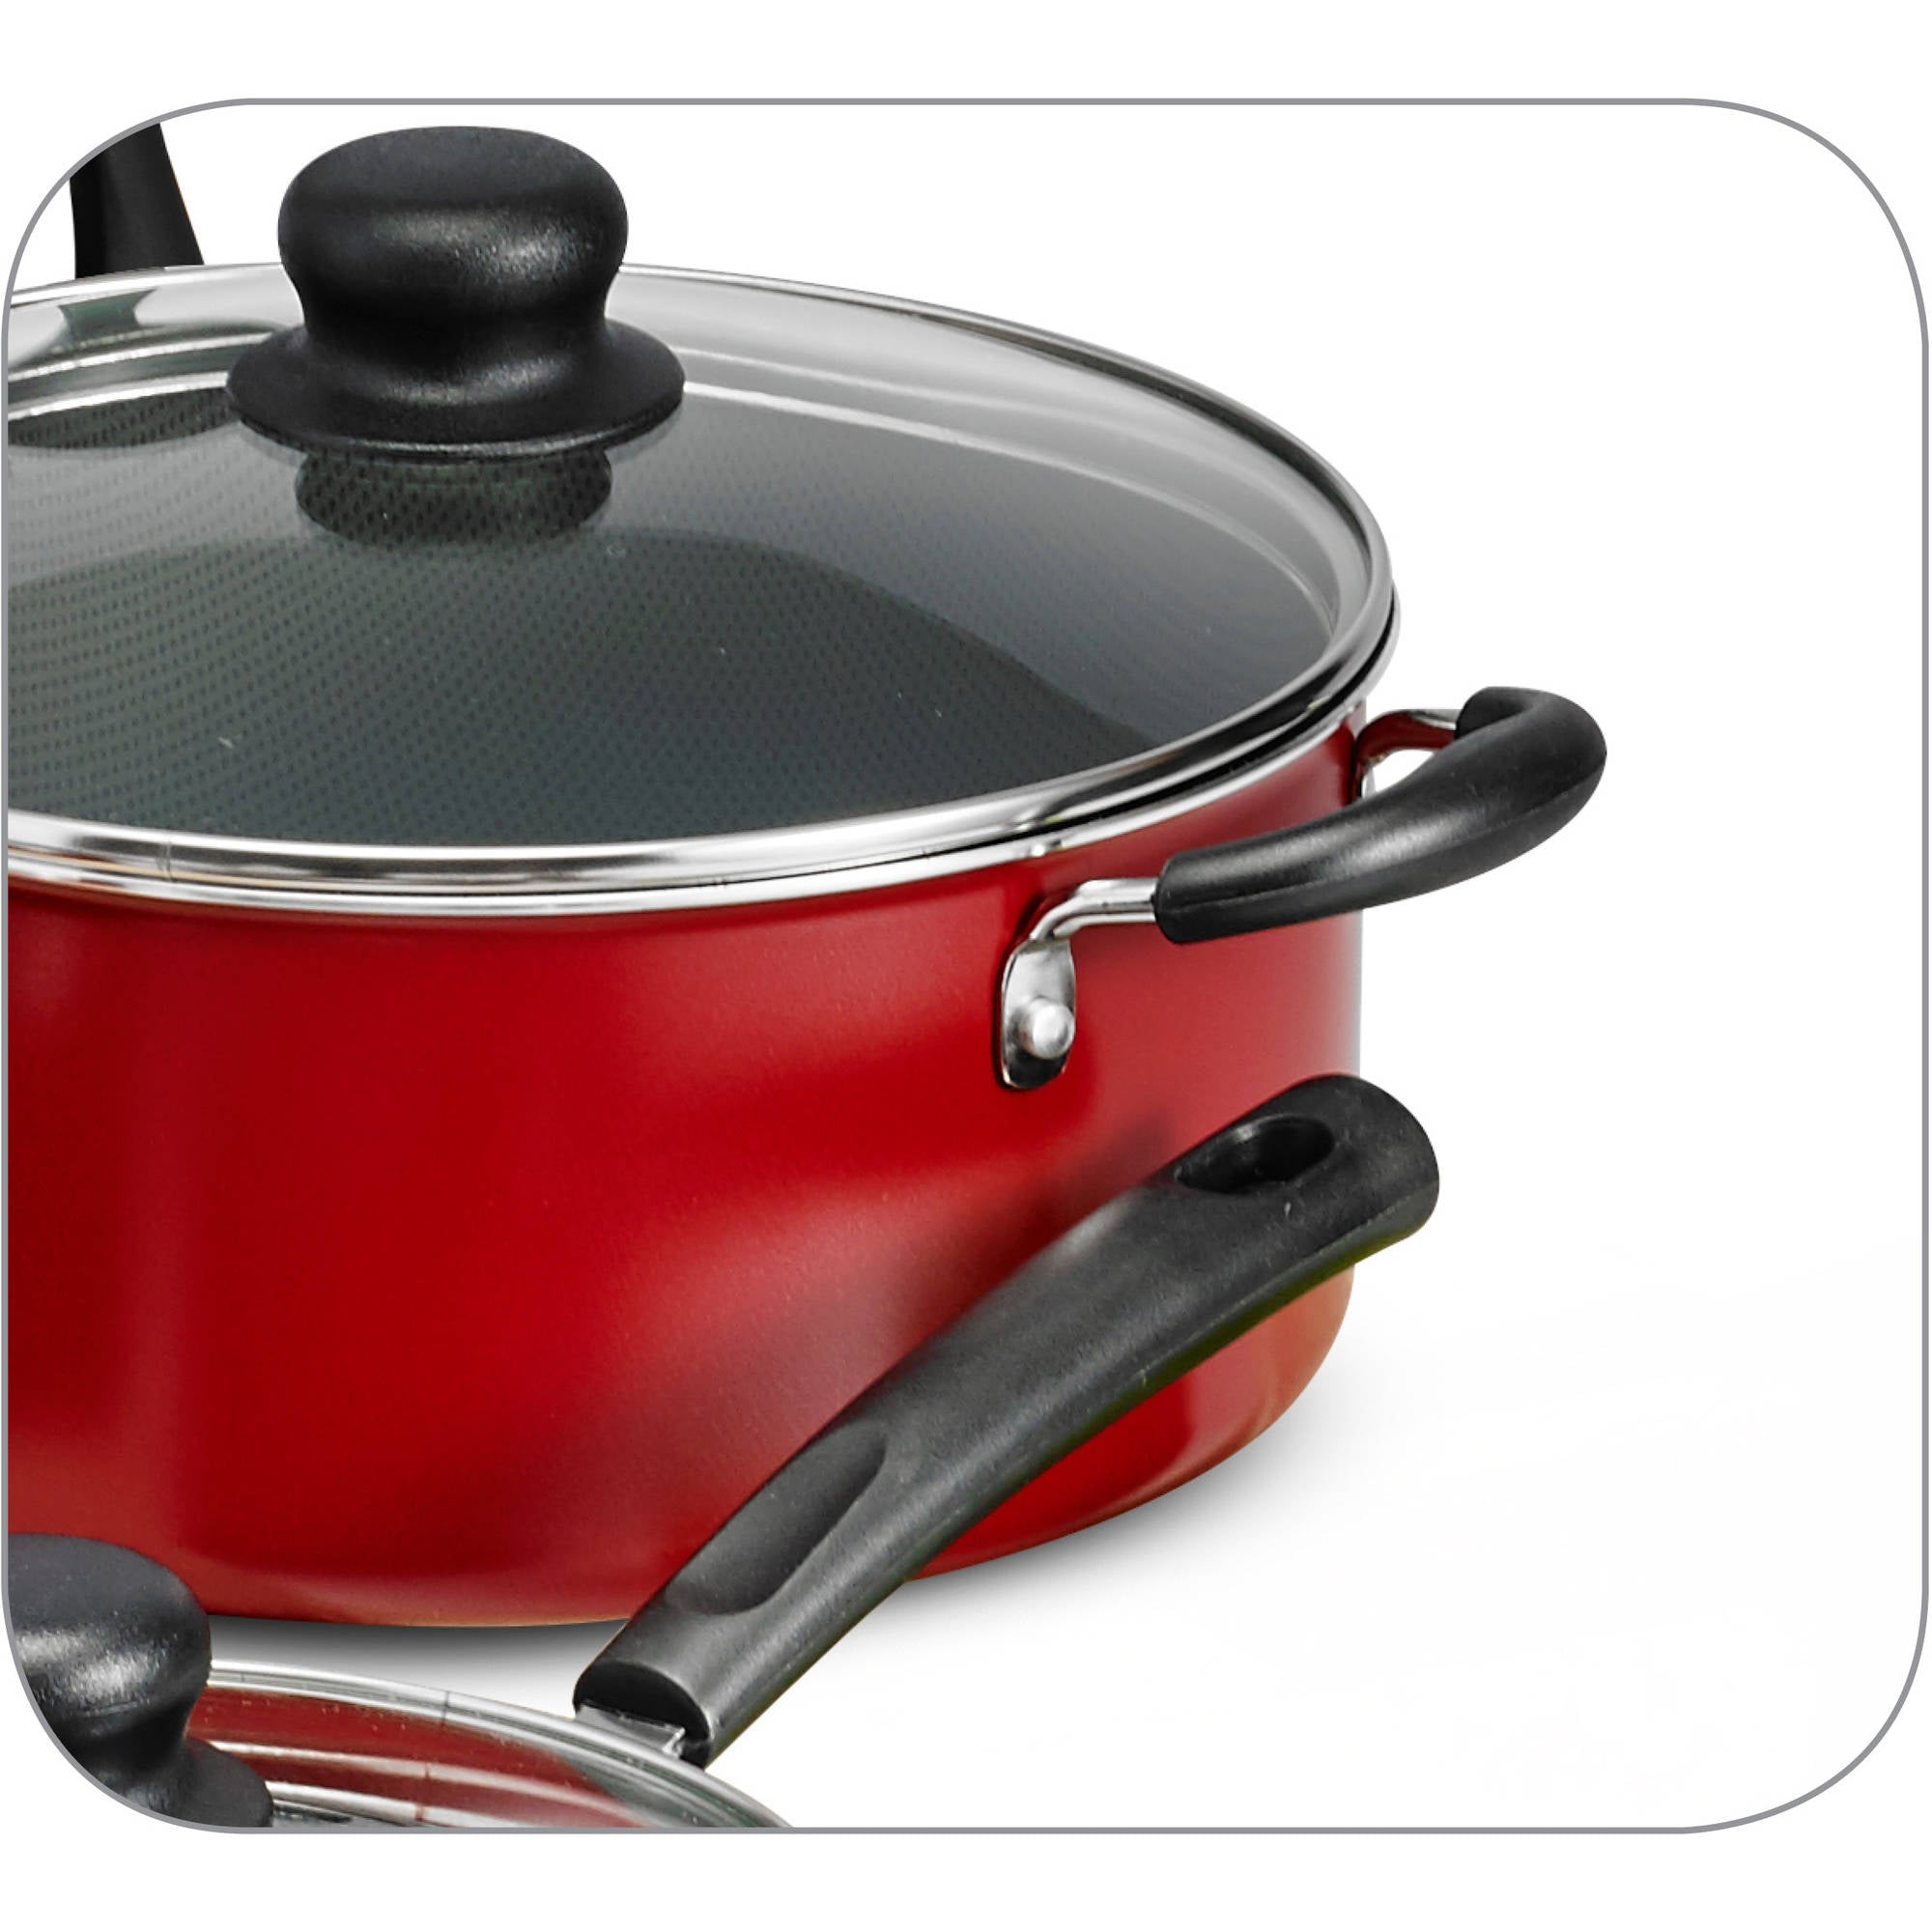 Tramontina Primaware 18 Piece Non-stick Cookware Set, Red – A